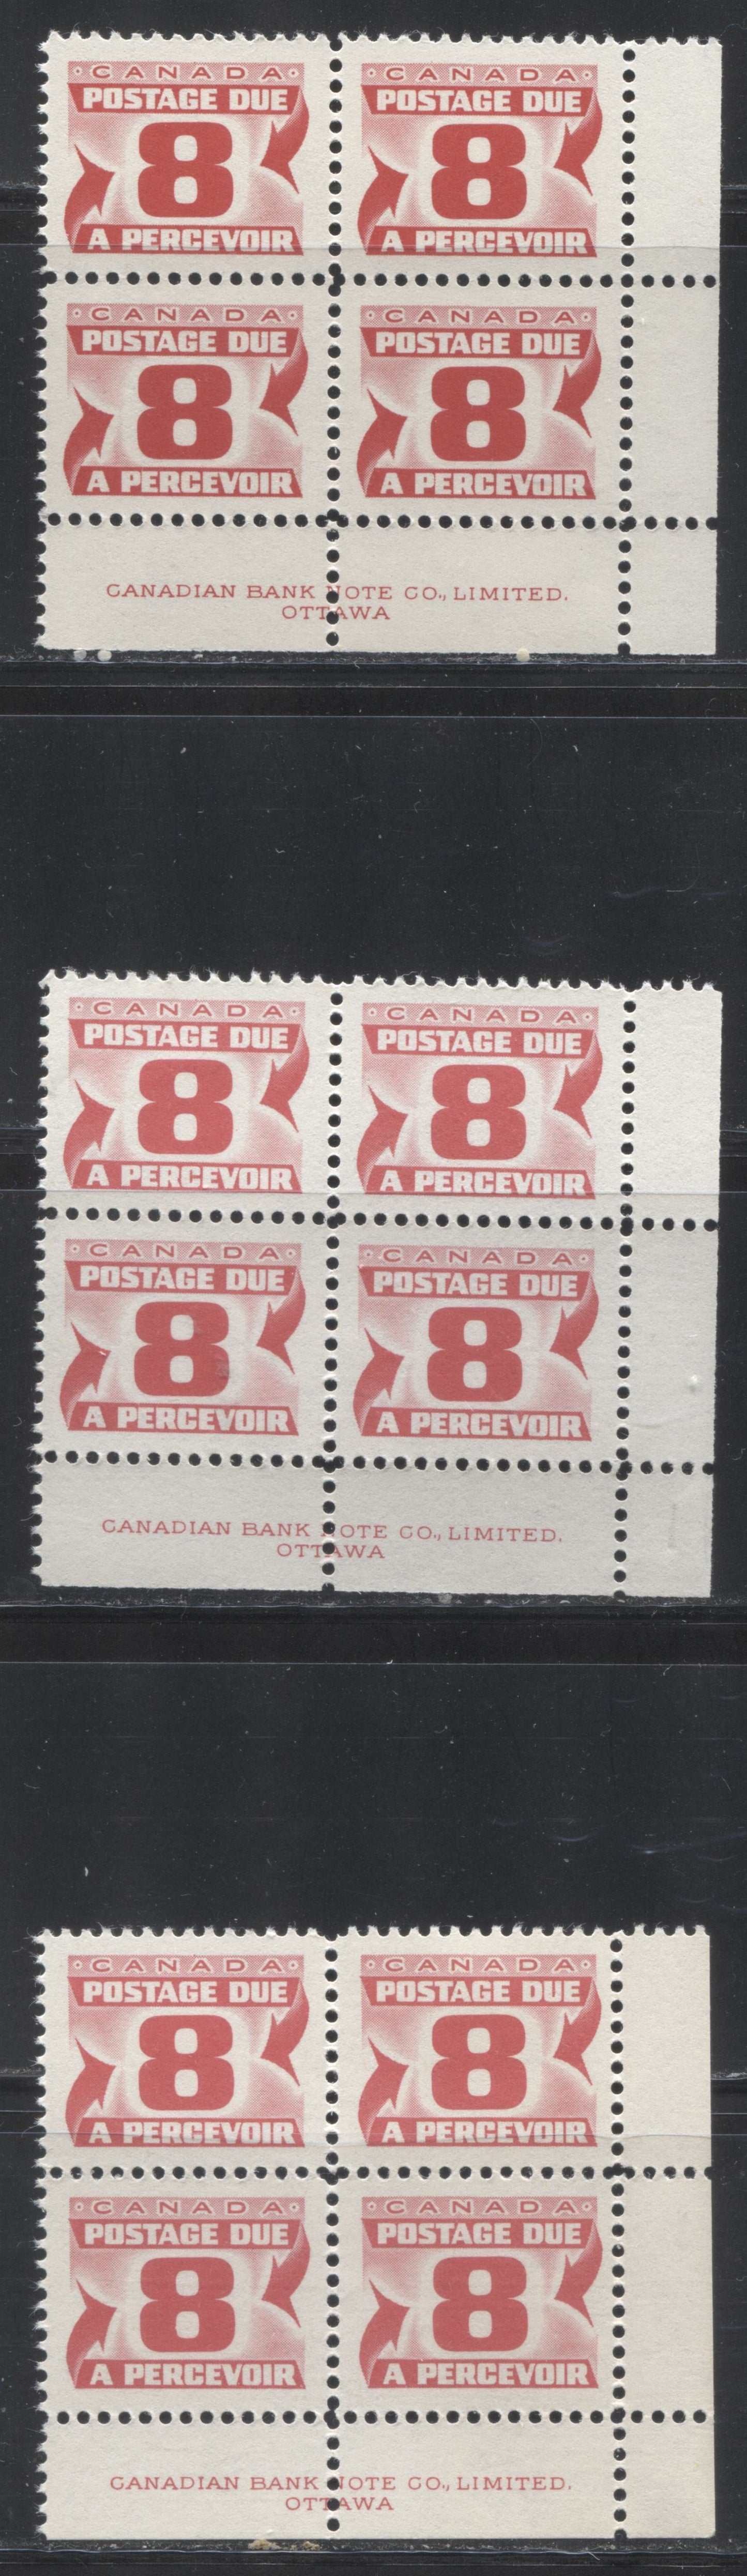 Lot 49 Canada #J34i 8c Carmine Rose 1969 Second Centennial Postage Due Issue, Three VFNH LR Inscription Blocks Of 4 On DF Grayish White, Bluish White & Gray Papers With Smooth & Streaky Dex Gums, Perf 12, Pale Shades